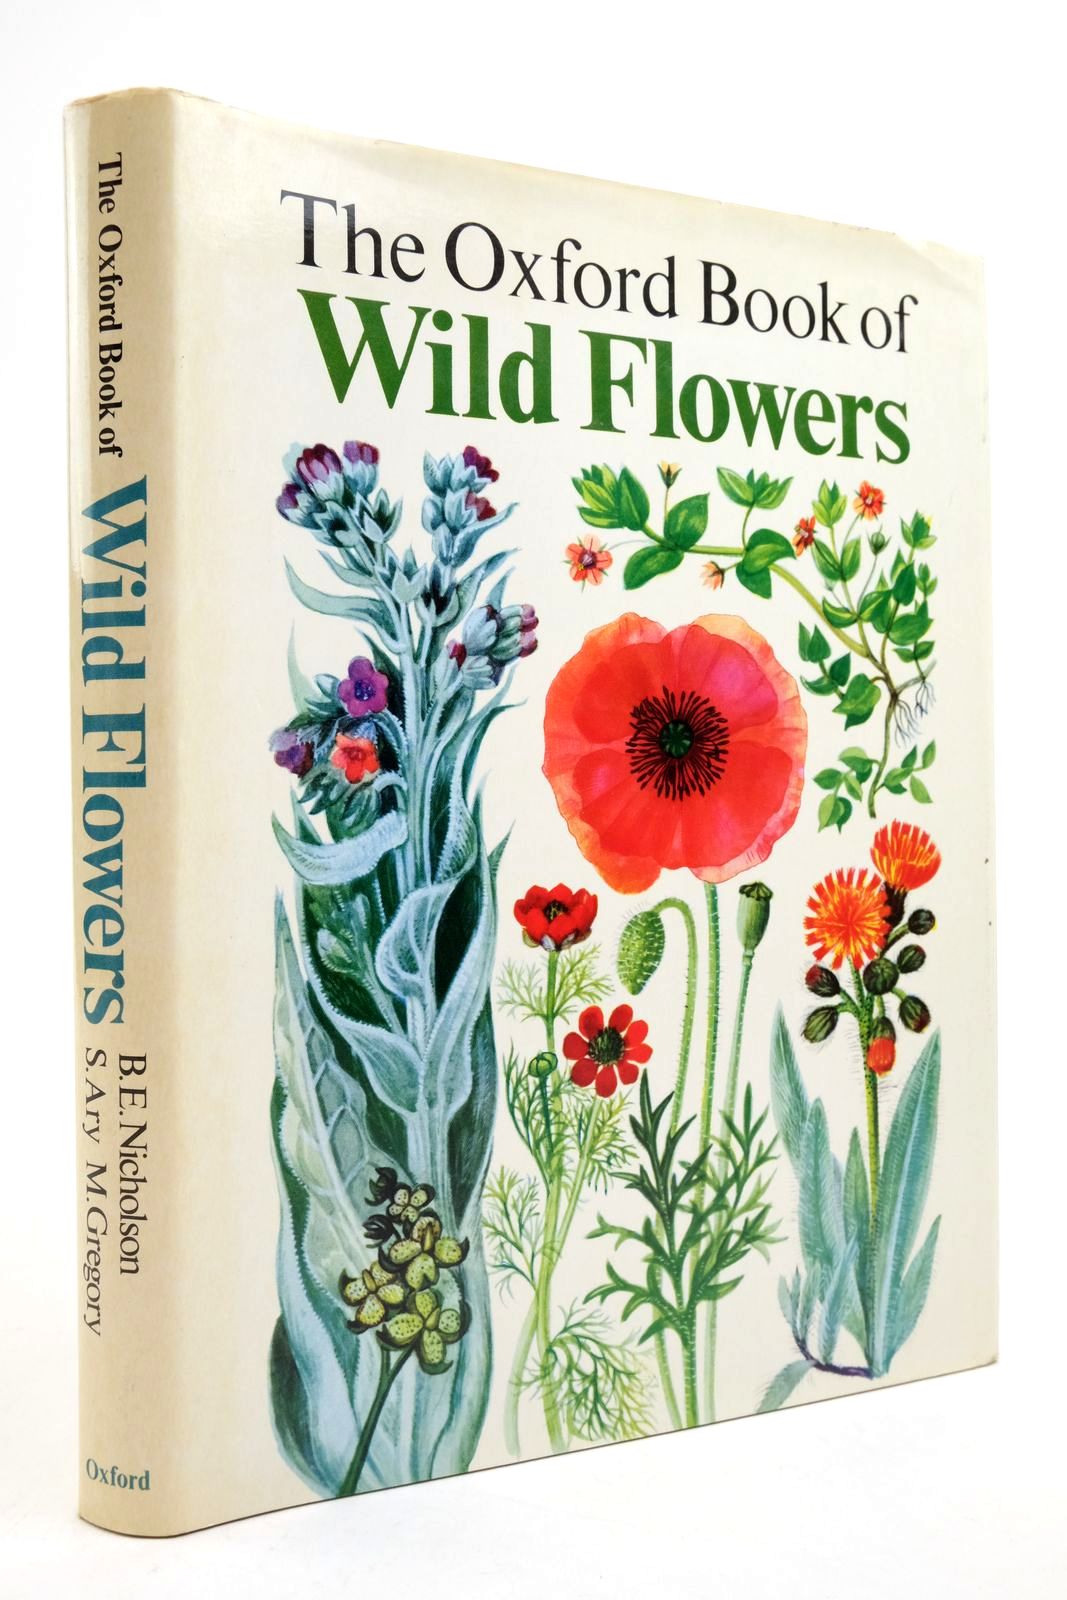 Photo of THE OXFORD BOOK OF WILD FLOWERS written by Nicholson, B.E. Ary, S. Gregory, M. illustrated by Nicholson, B.E. published by Oxford University Press (STOCK CODE: 2138887)  for sale by Stella & Rose's Books